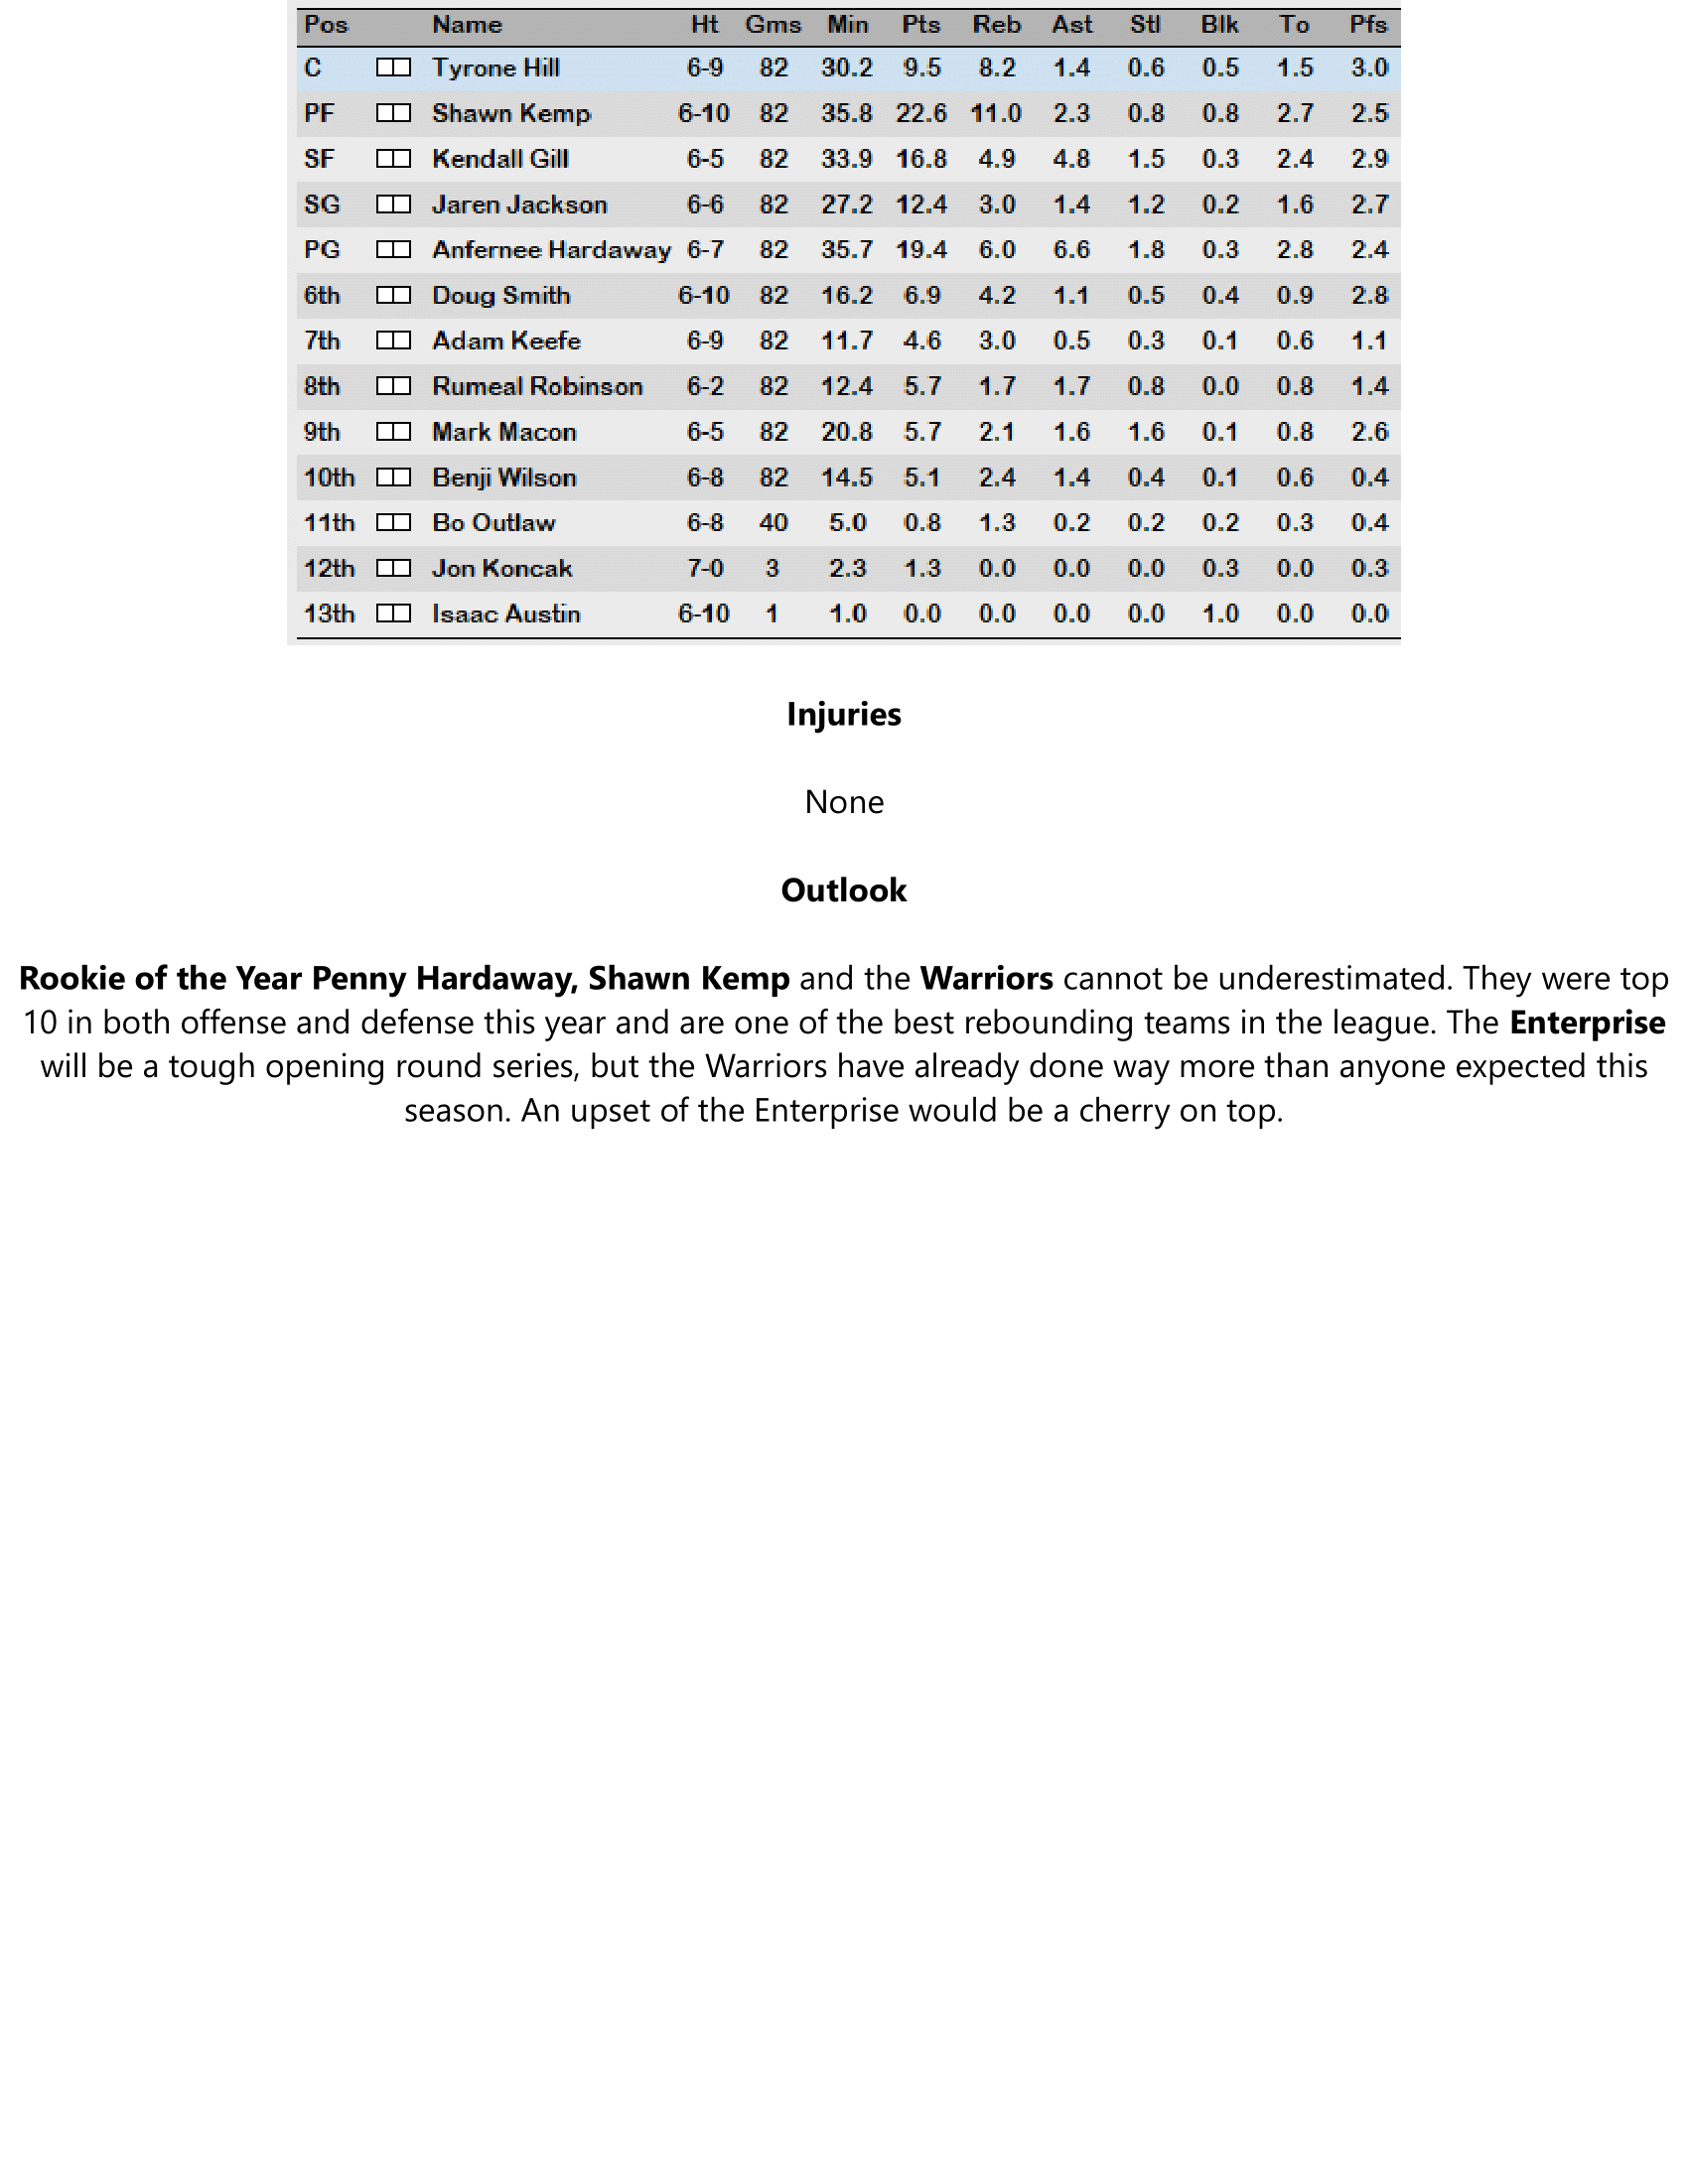 93-94-Part-4-Playoff-Preview-13.png